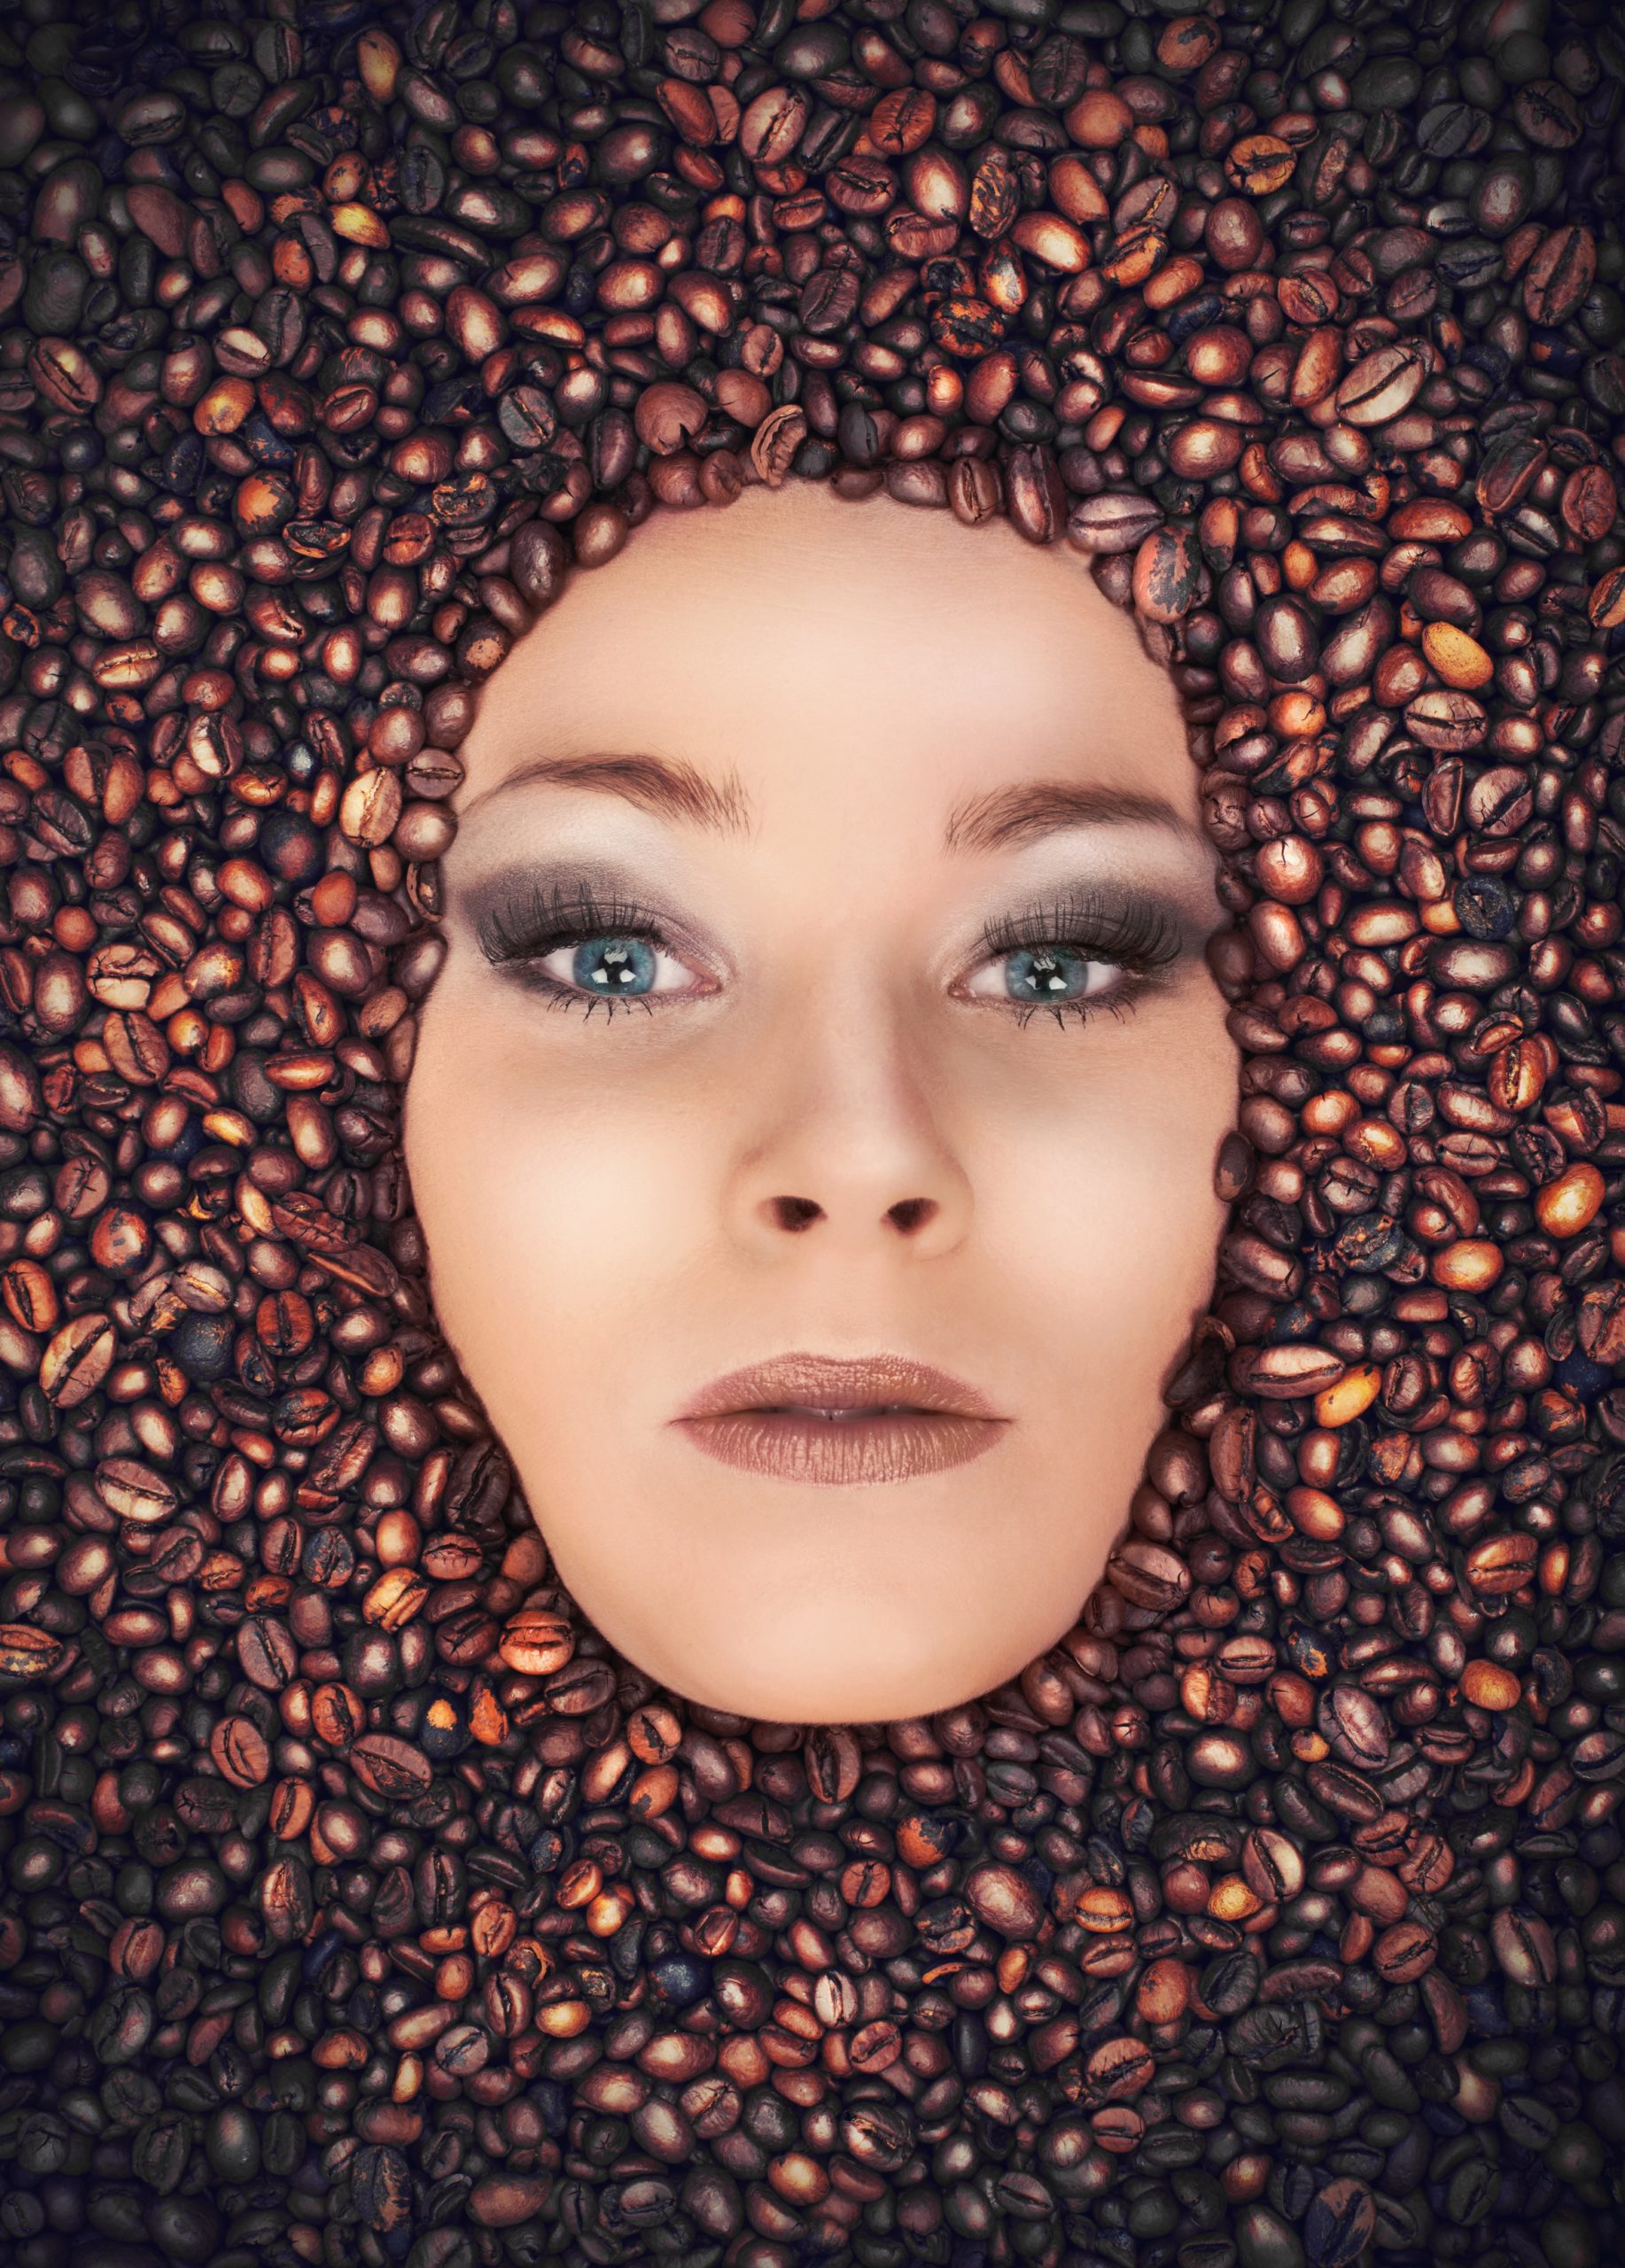 Concept of coffee with attractive girl immersed in coffee beans